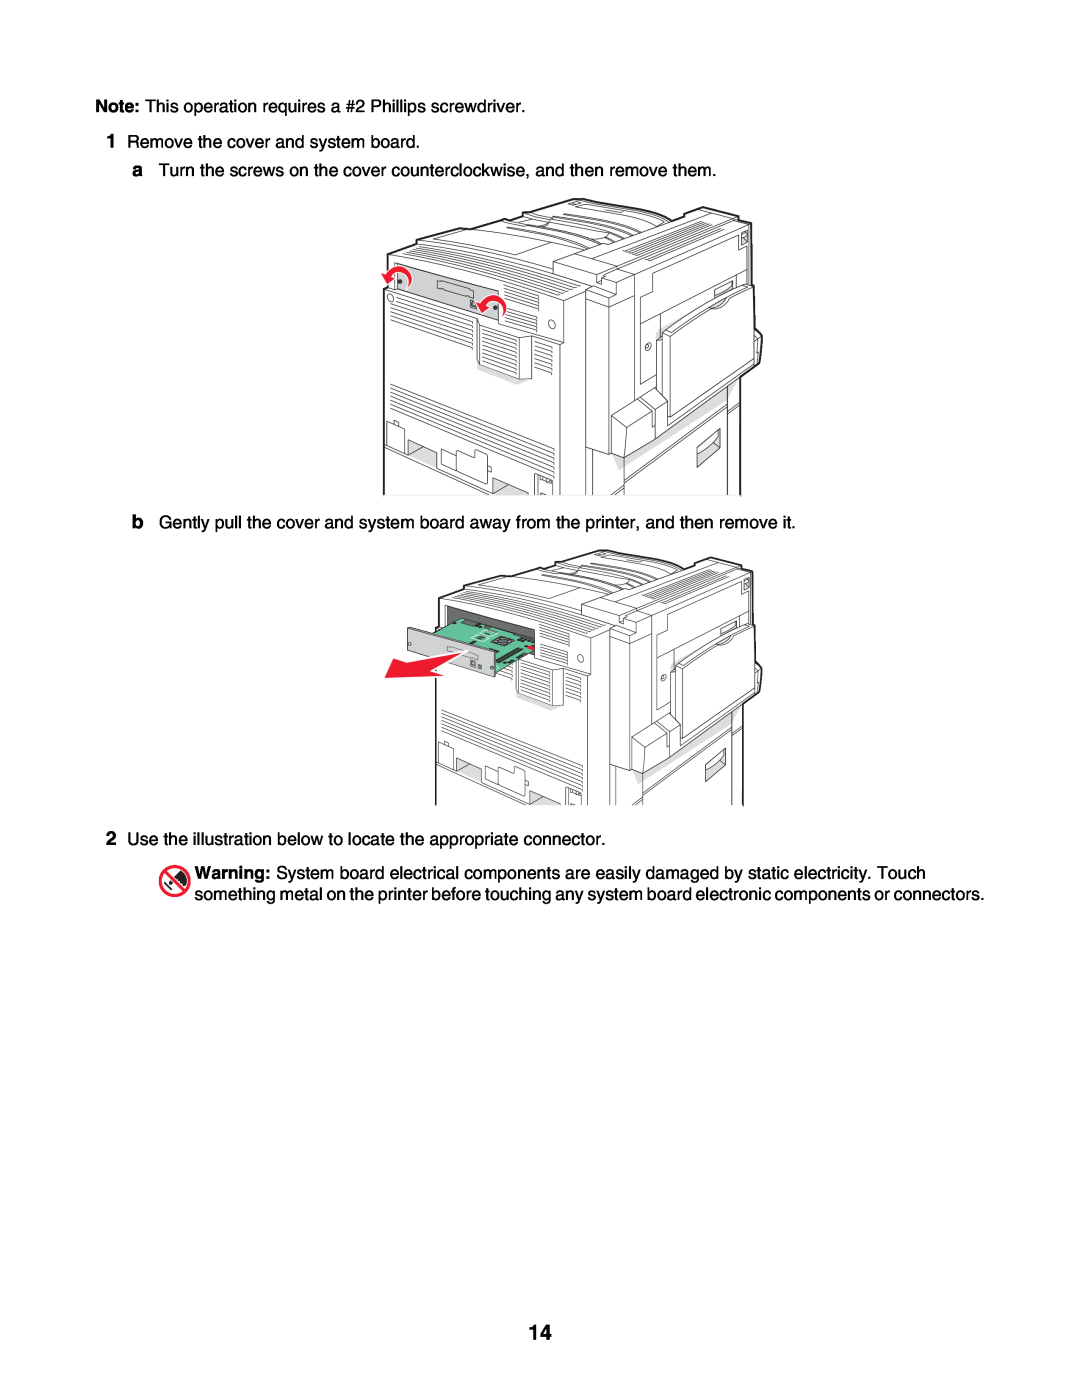 Lexmark C935 manual Note This operation requires a #2 Phillips screwdriver, Remove the cover and system board 